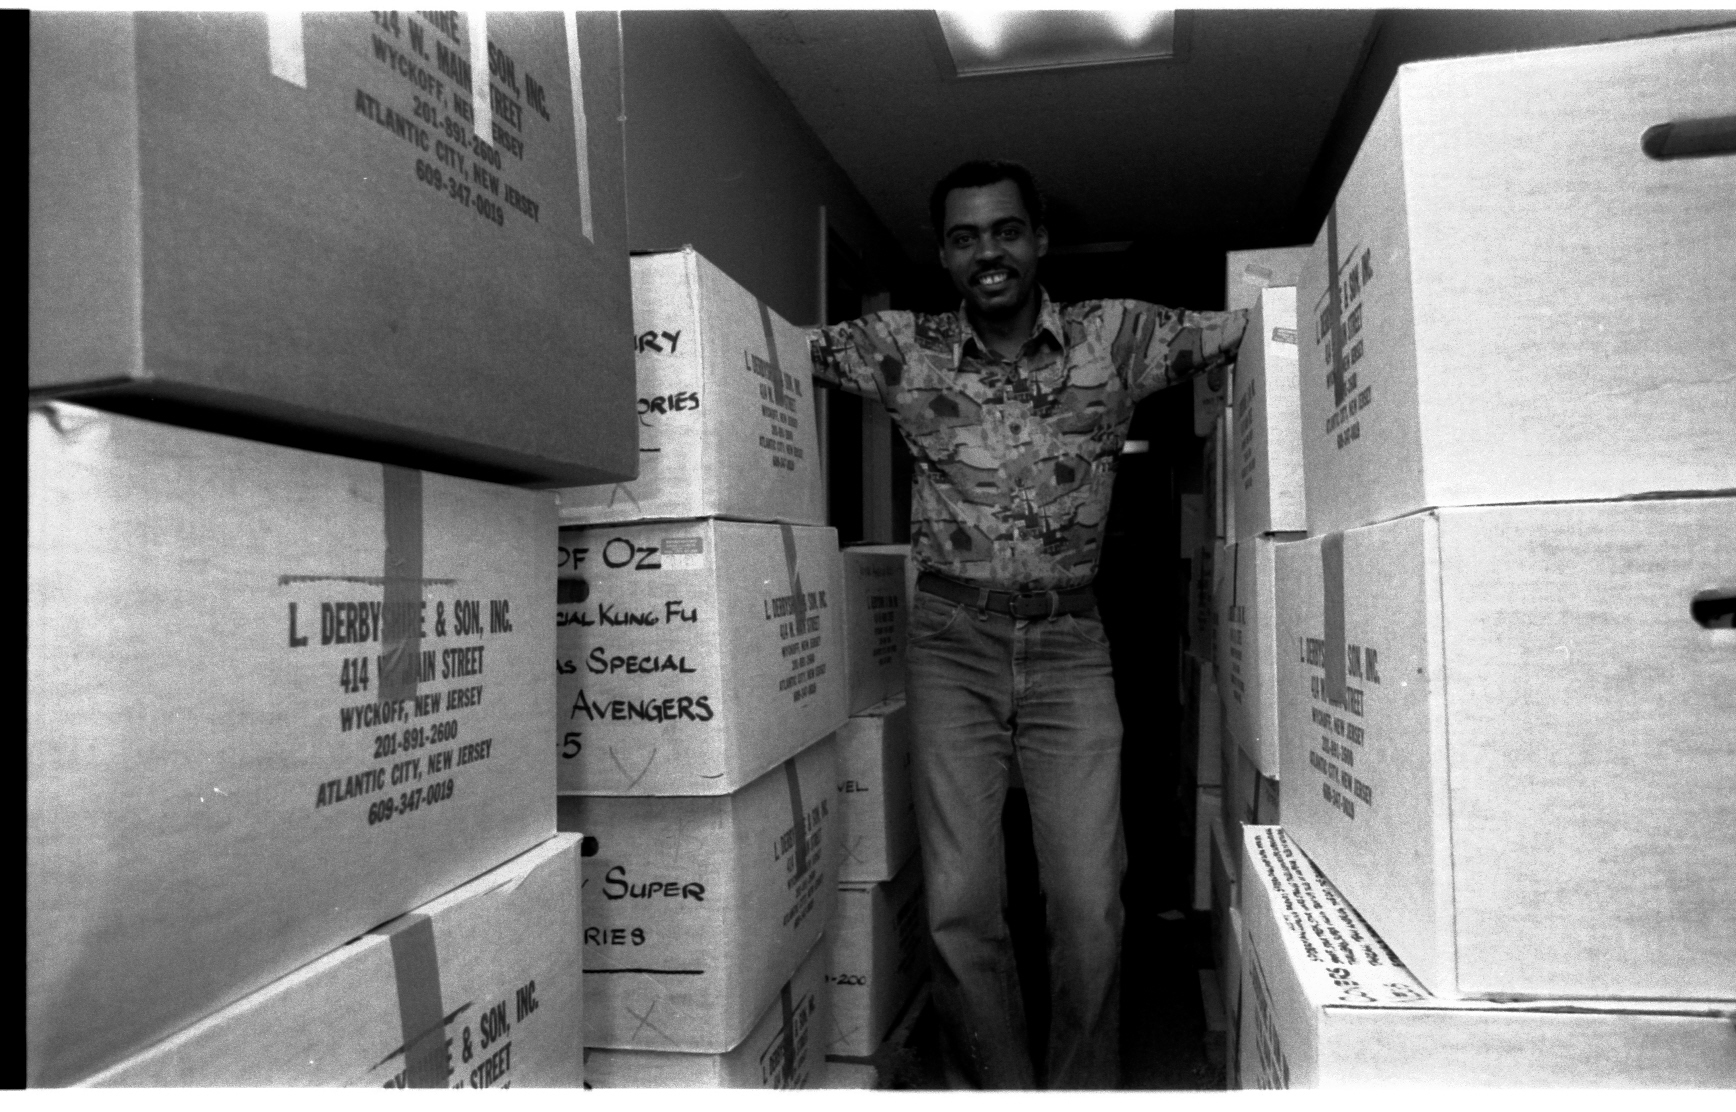 Hard to believe, but the Wack-Off Games were the last Hurrah! of the 57th St. offices of Marvel. Held on a Friday, that weekend was Moving Day down to 387 Park Ave South! Here is Mailroom Specialist, Cliff, who was responsible for "stripping film flats" and storing them, surrounded by boxes filled with film.